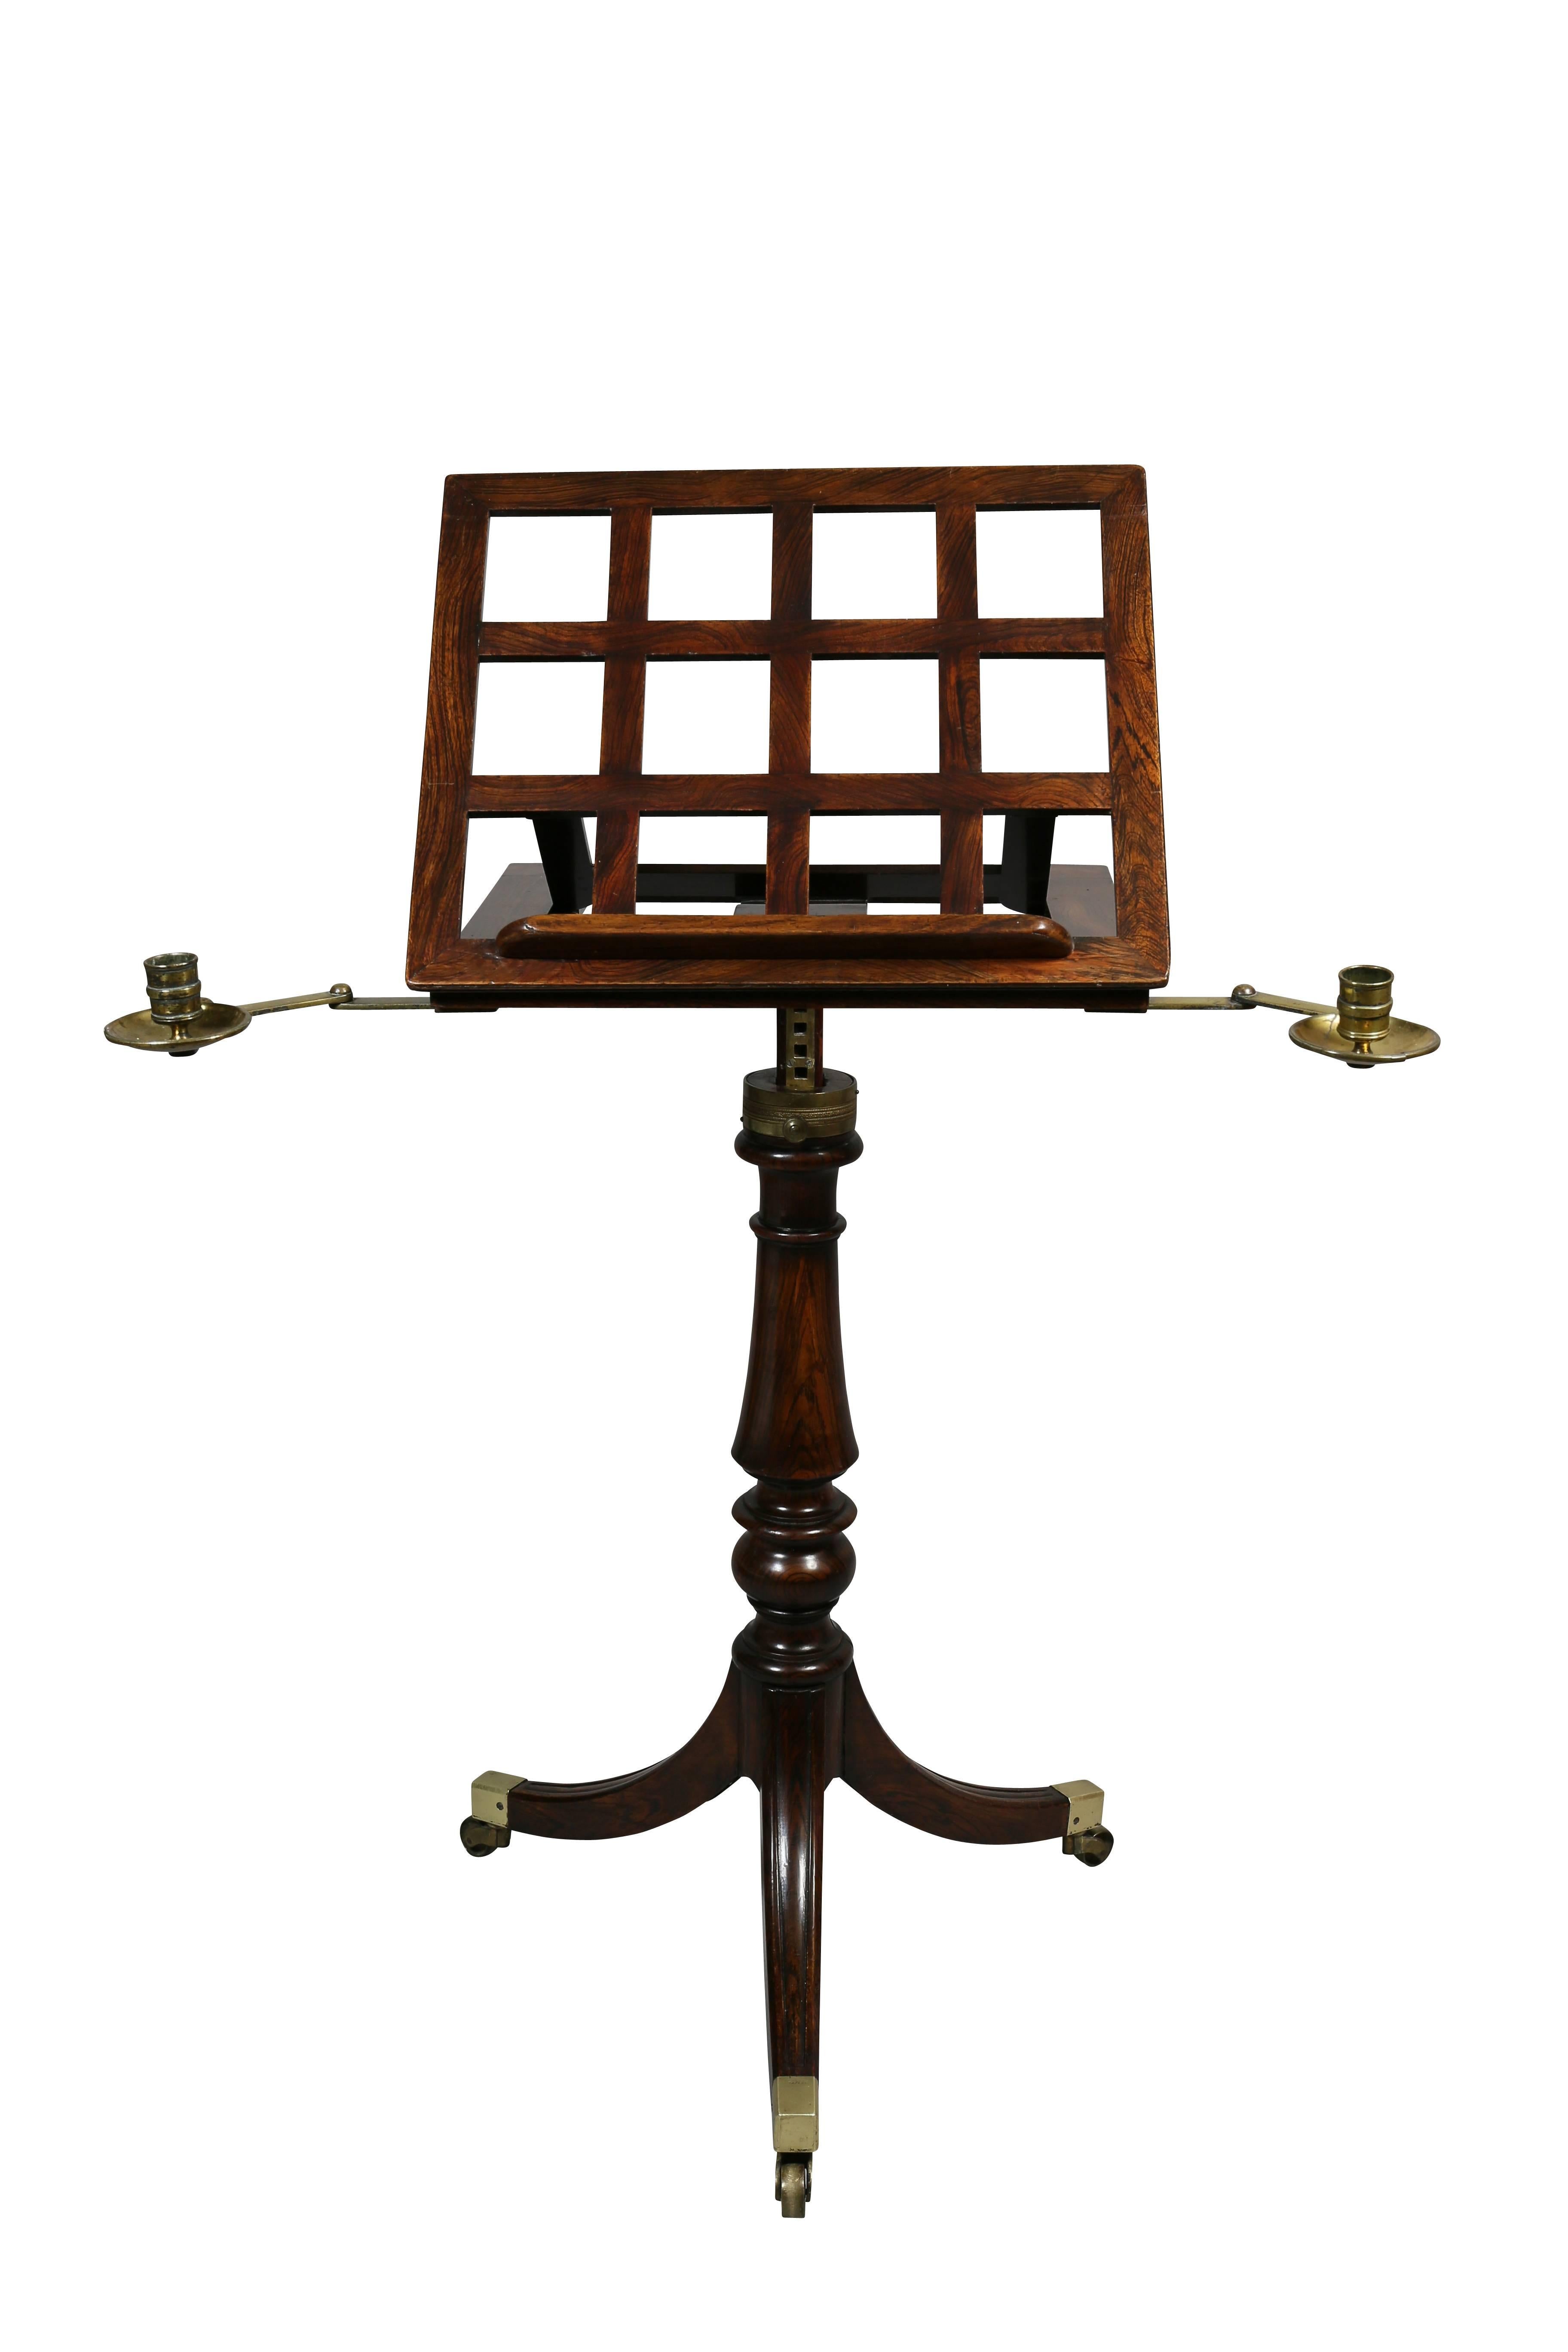 With tilting grill form adjustable book stand with original detachable brass candle arms, base with ratchet height adjuster turned support raised on tripartite base with casters. Caster cup signed BS&P Patent.